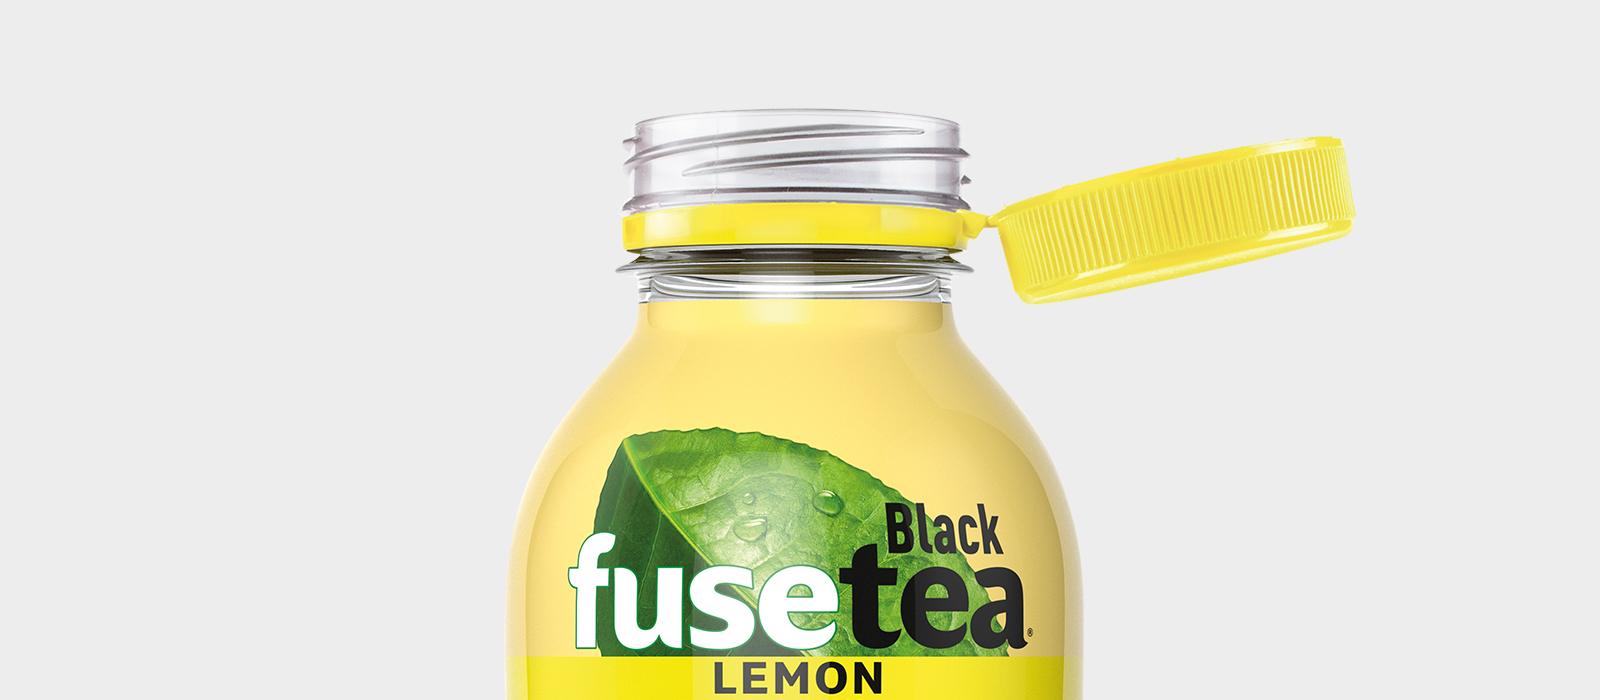 fusetea bottle with thethered cap